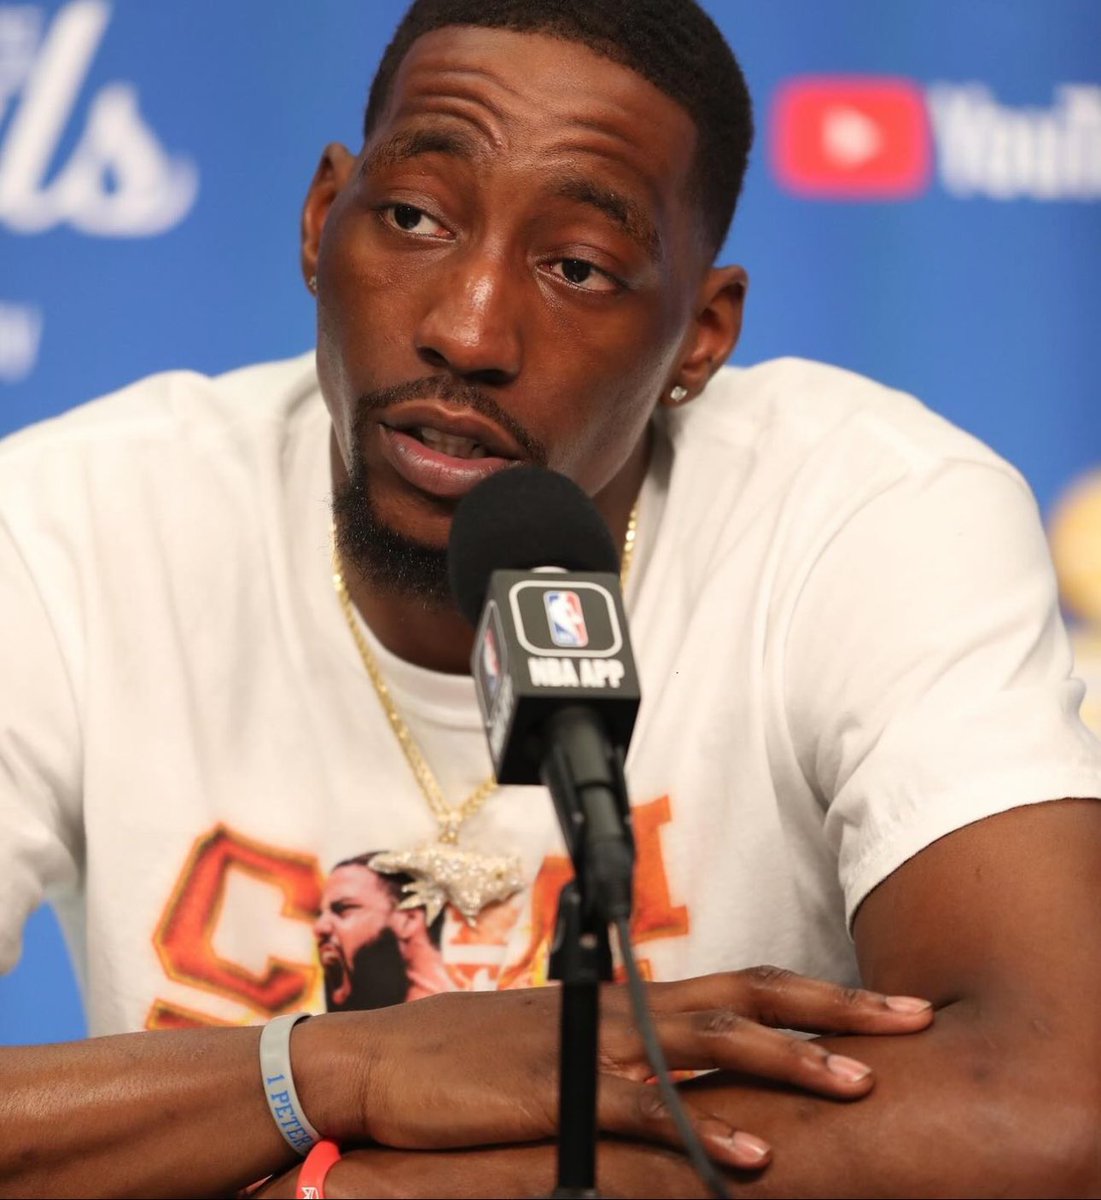 Bam Adebayo has committed to donate $13 for each point he scores during the season to support children in need, aiming to help them overcome financial barriers to participating in organized sports. The beneficiary of this pledge is the Liberty City Optimus Club Youth Center ❤️